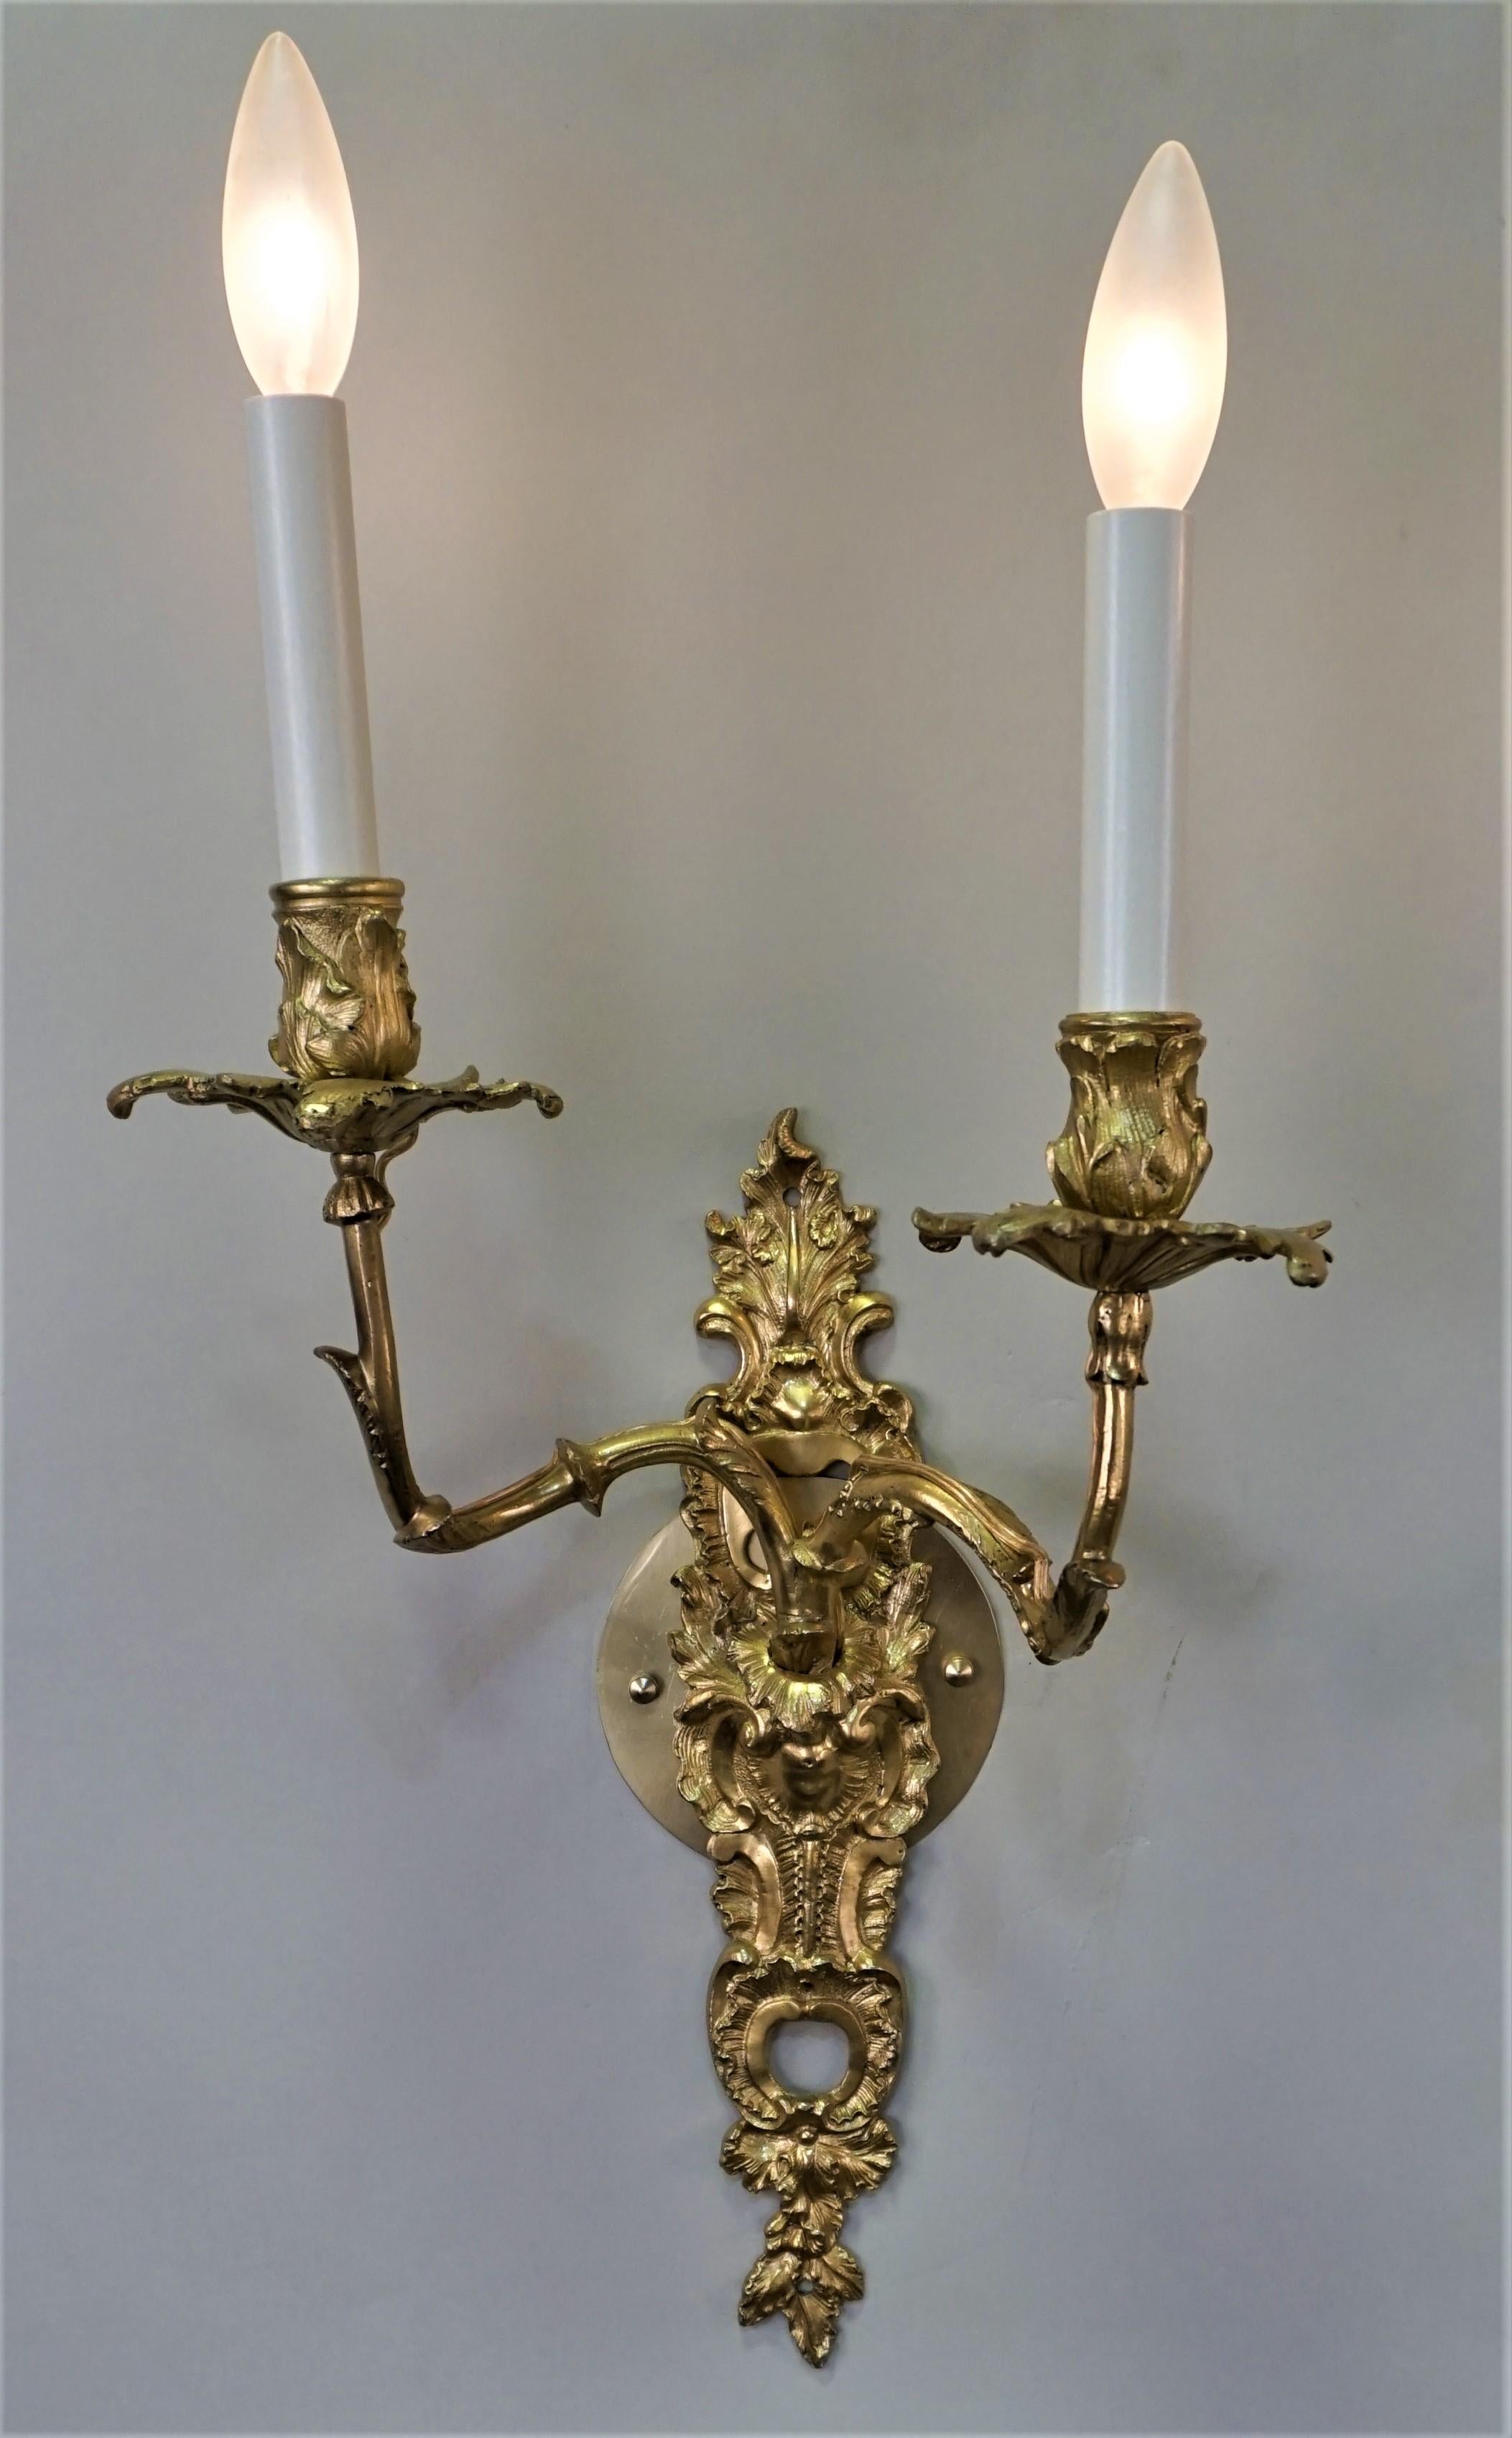 Pair of double arm gild bronze candle wall sconces that have been professionally electrified.